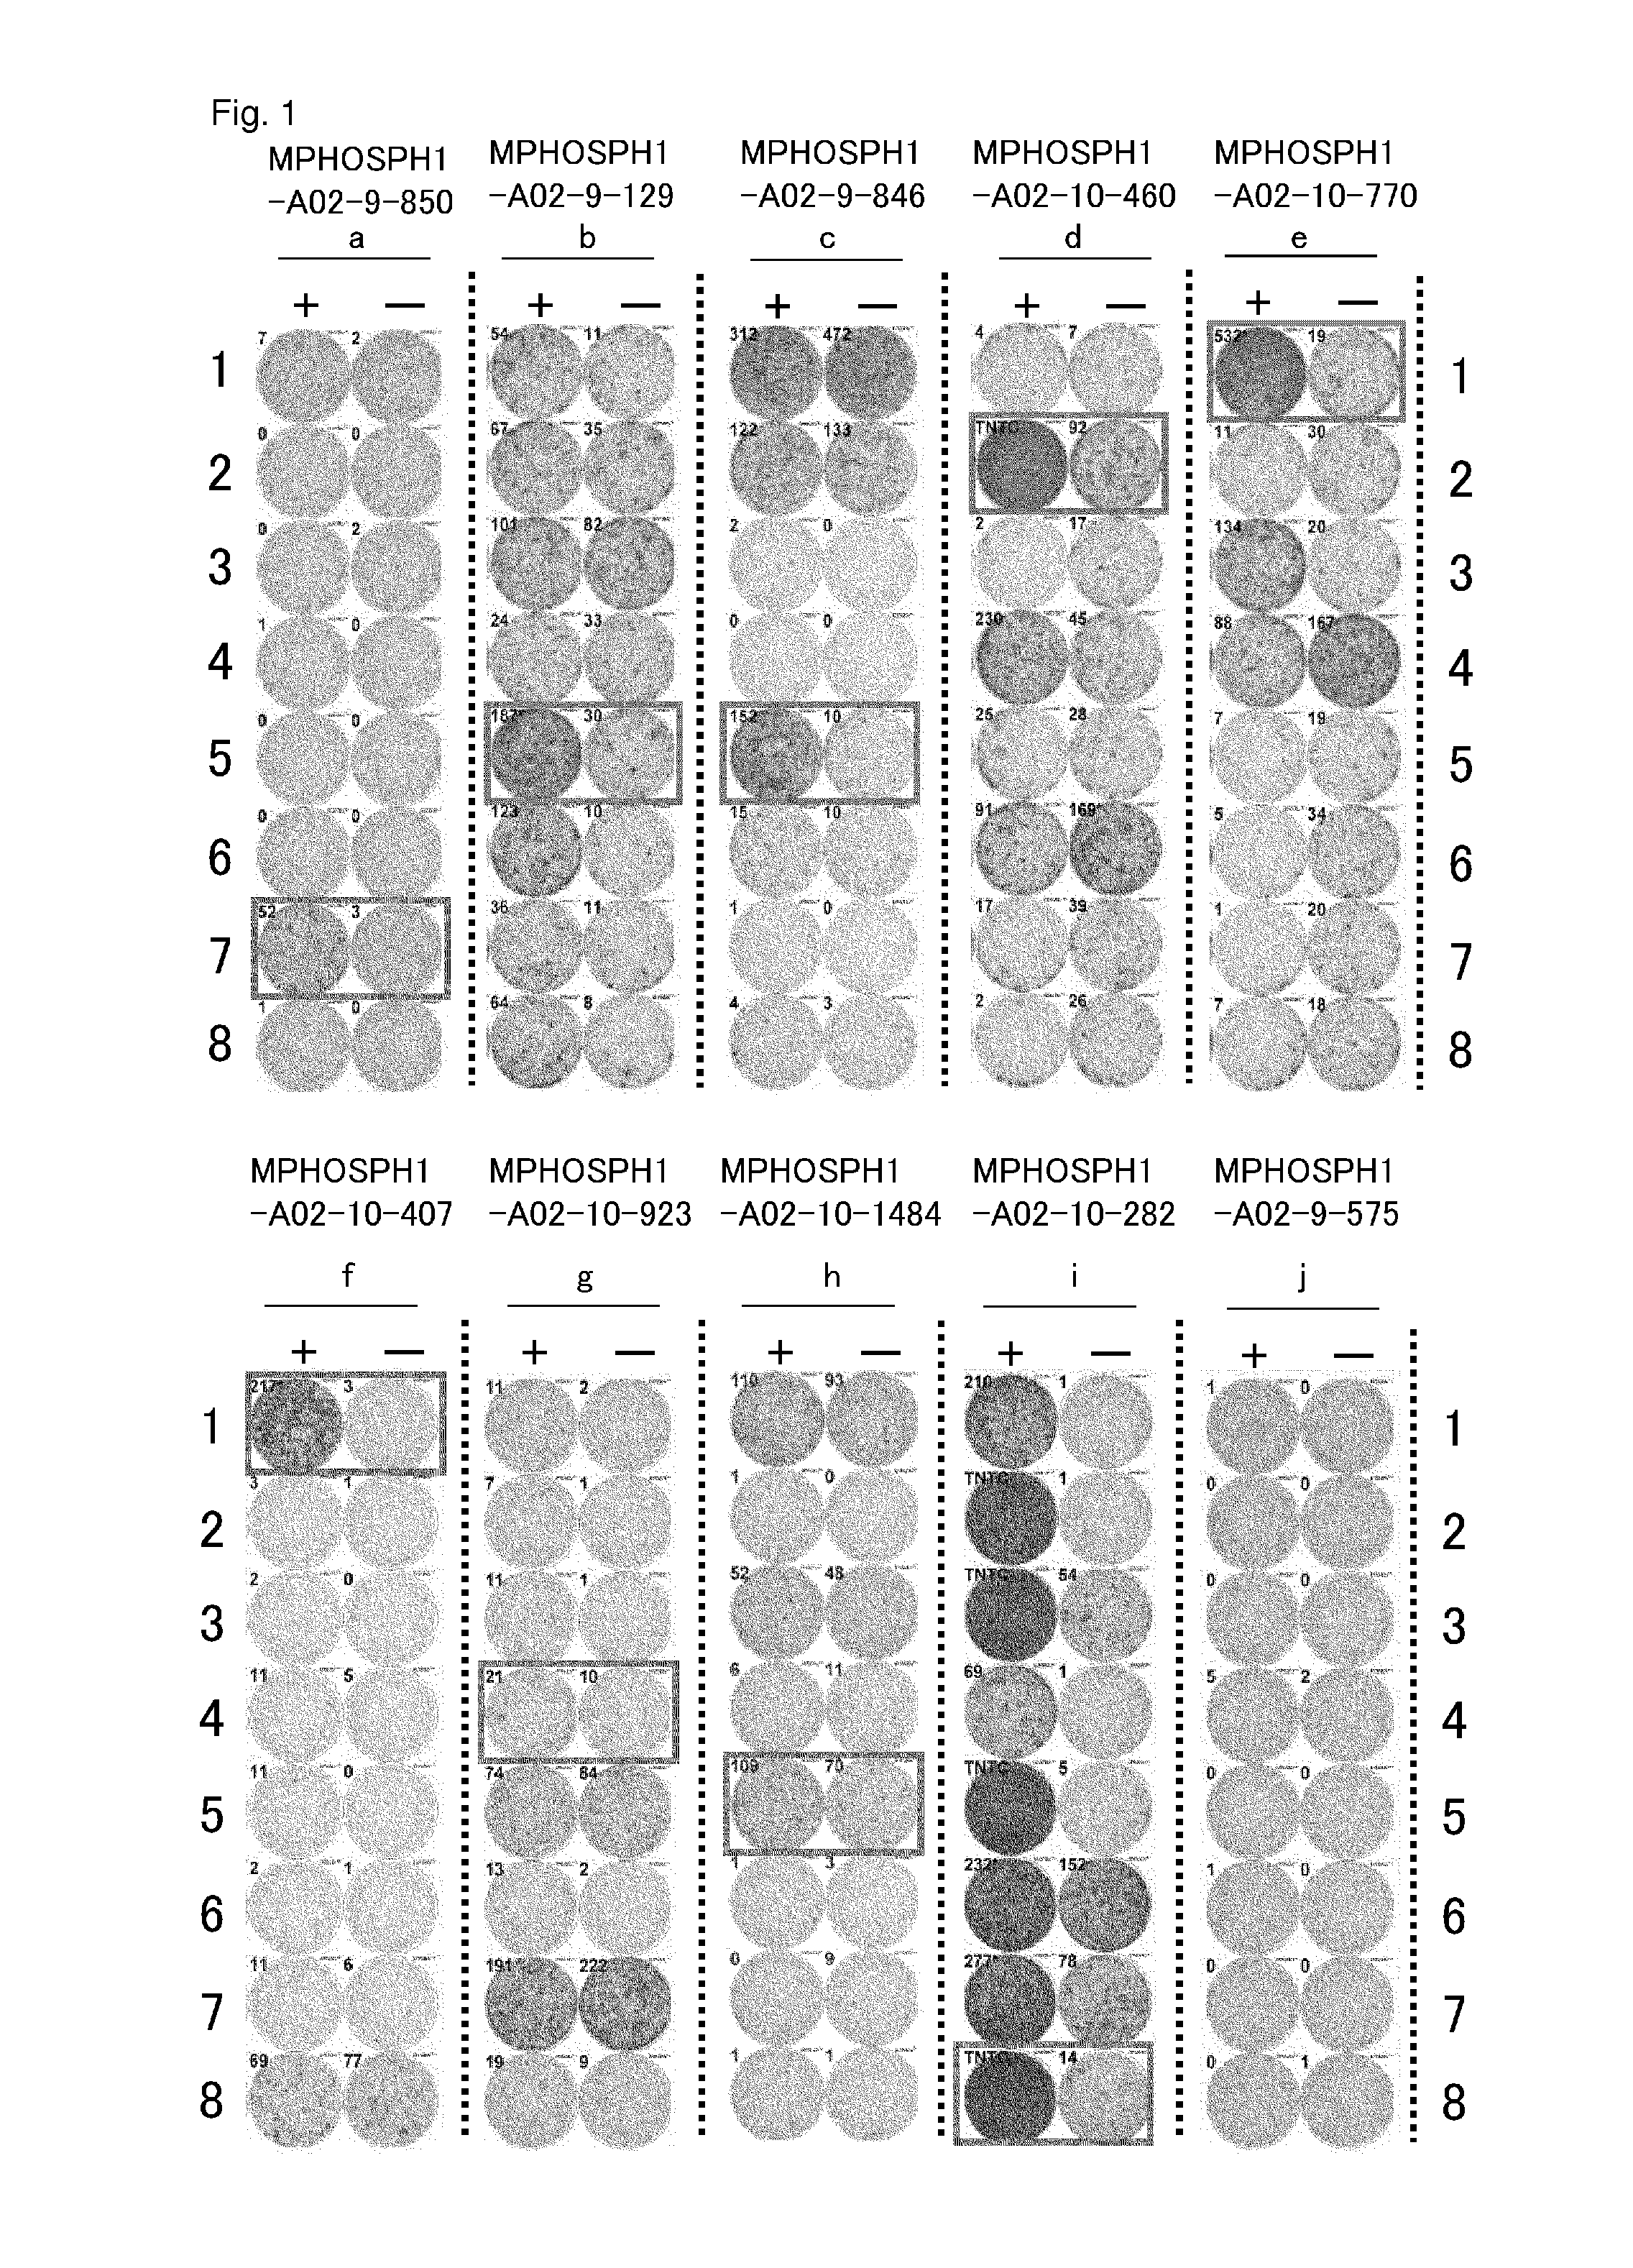 MPHOSPH1 peptides and vaccines including the same